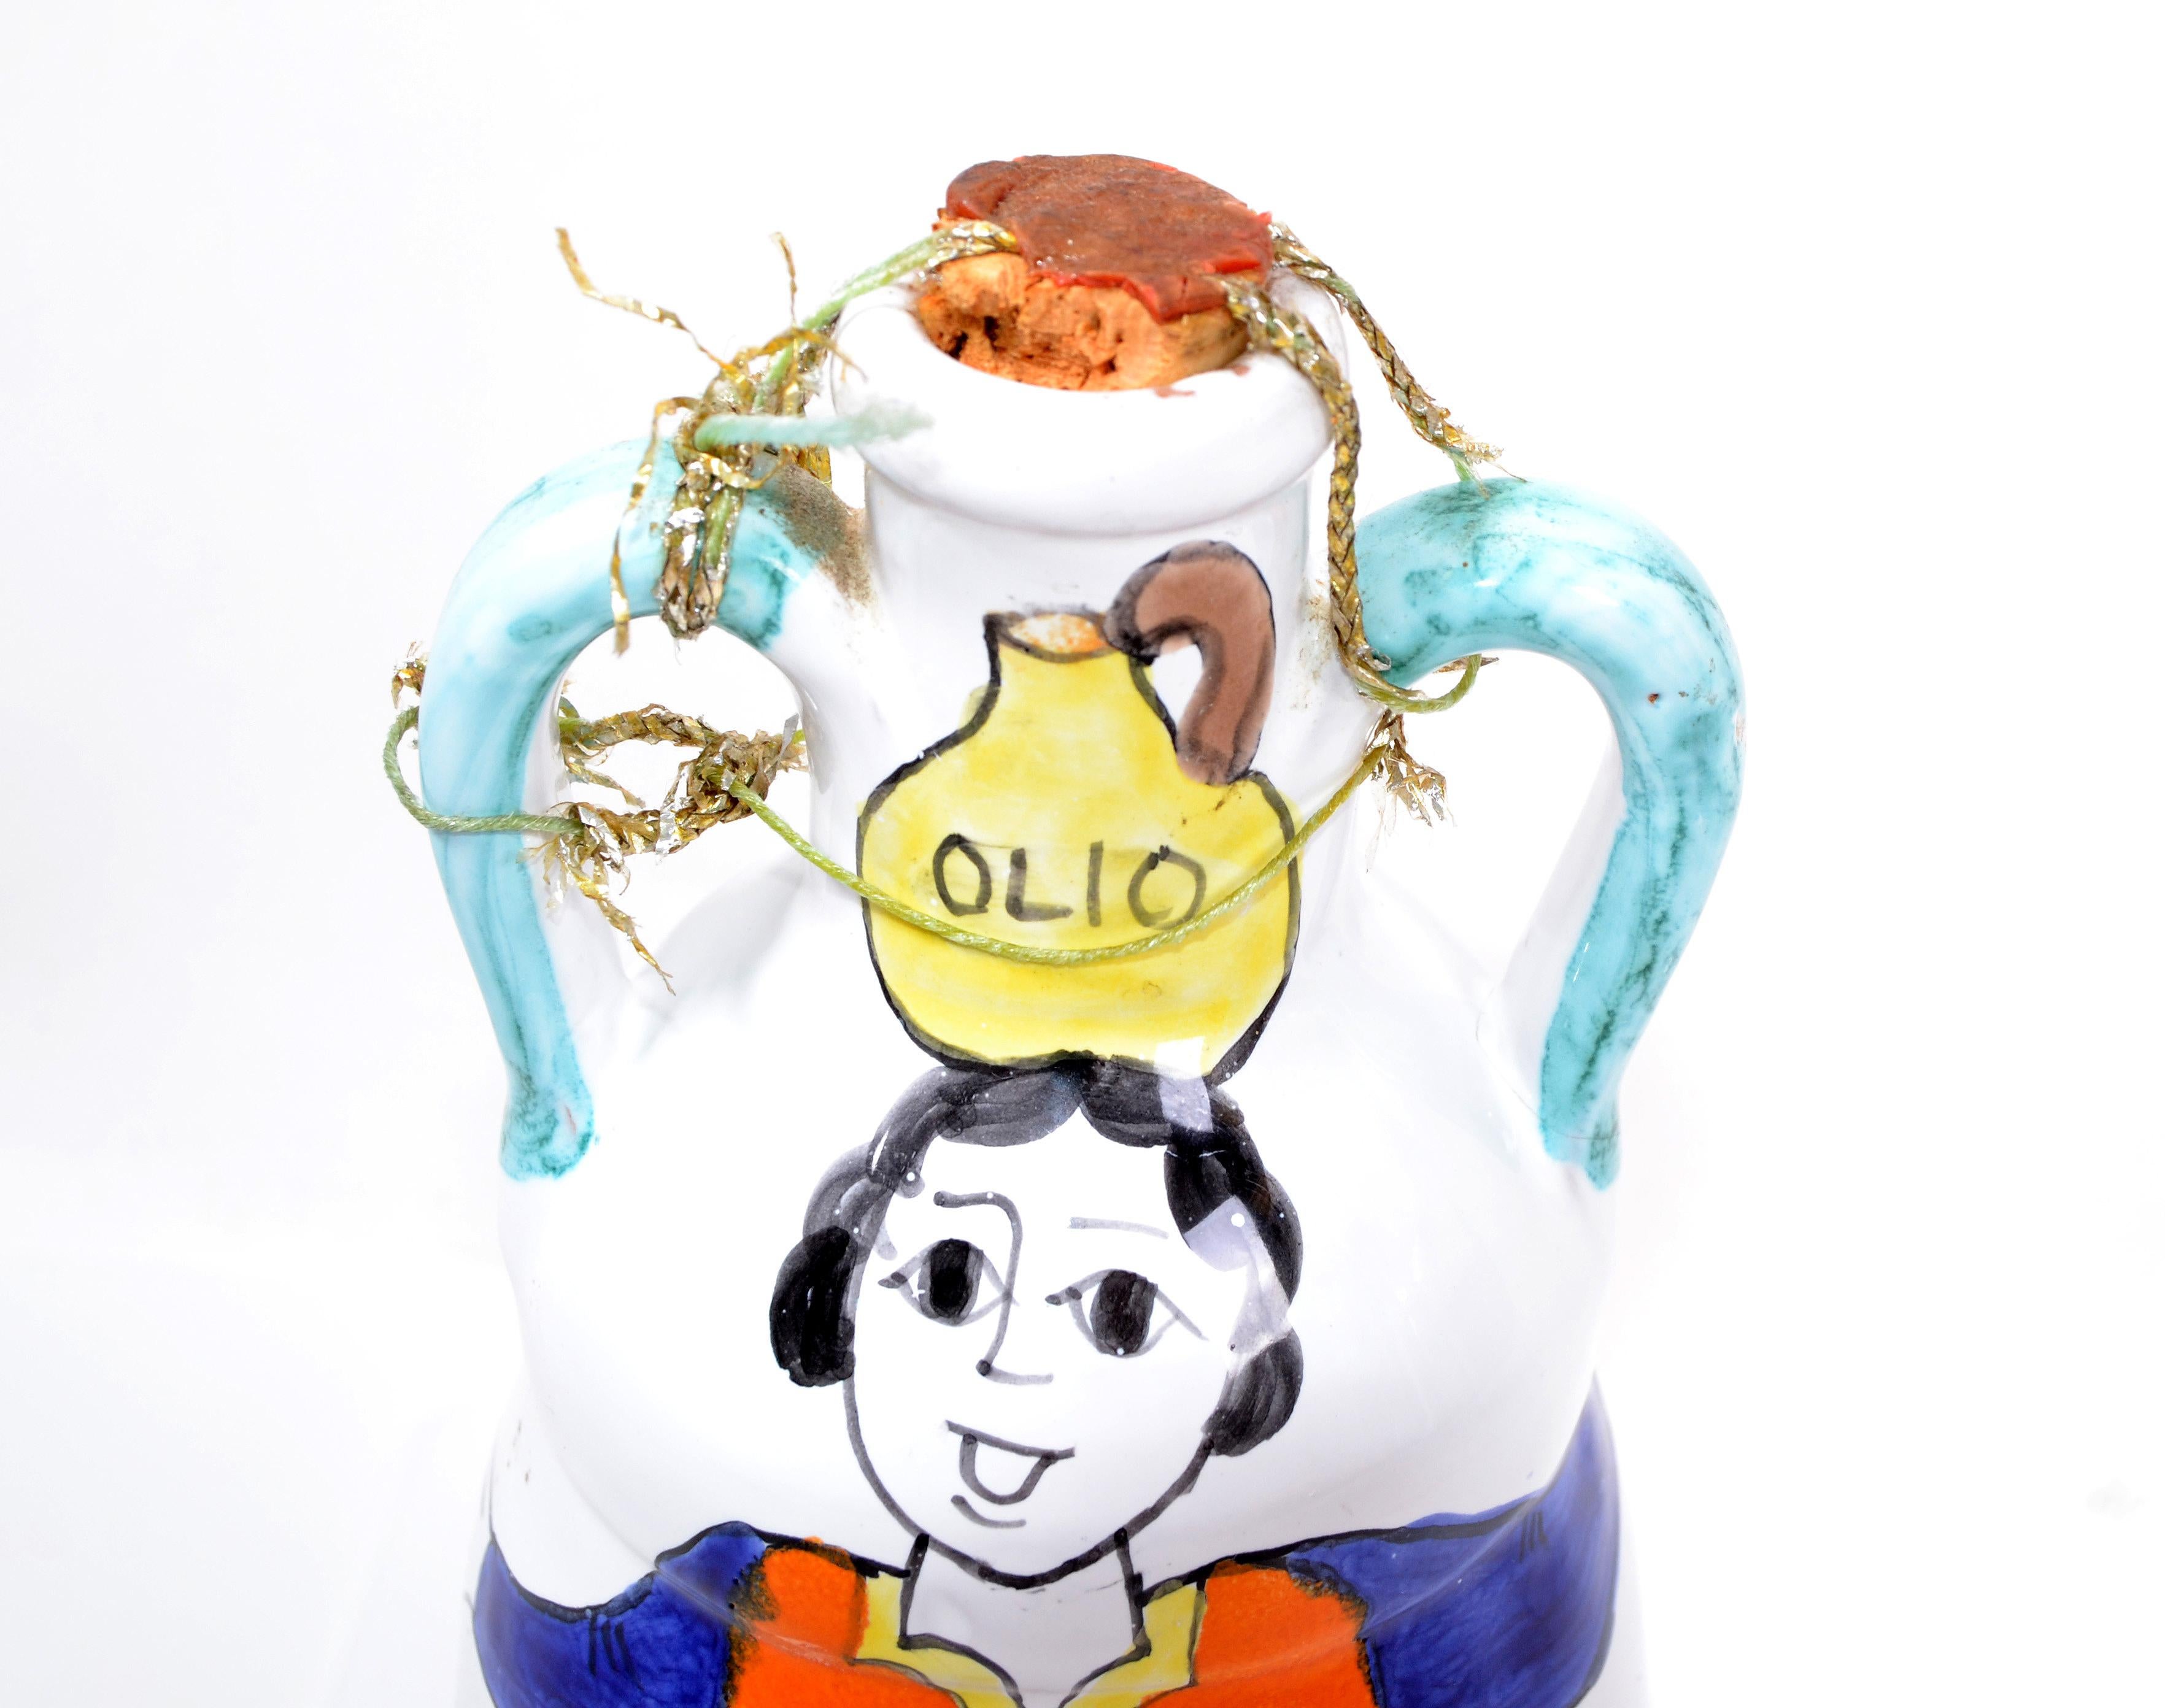 Mid-20th Century Desimone Hand Painted Art Pottery Olive Oil Vessel, Decanter, Jar Signed, Italy